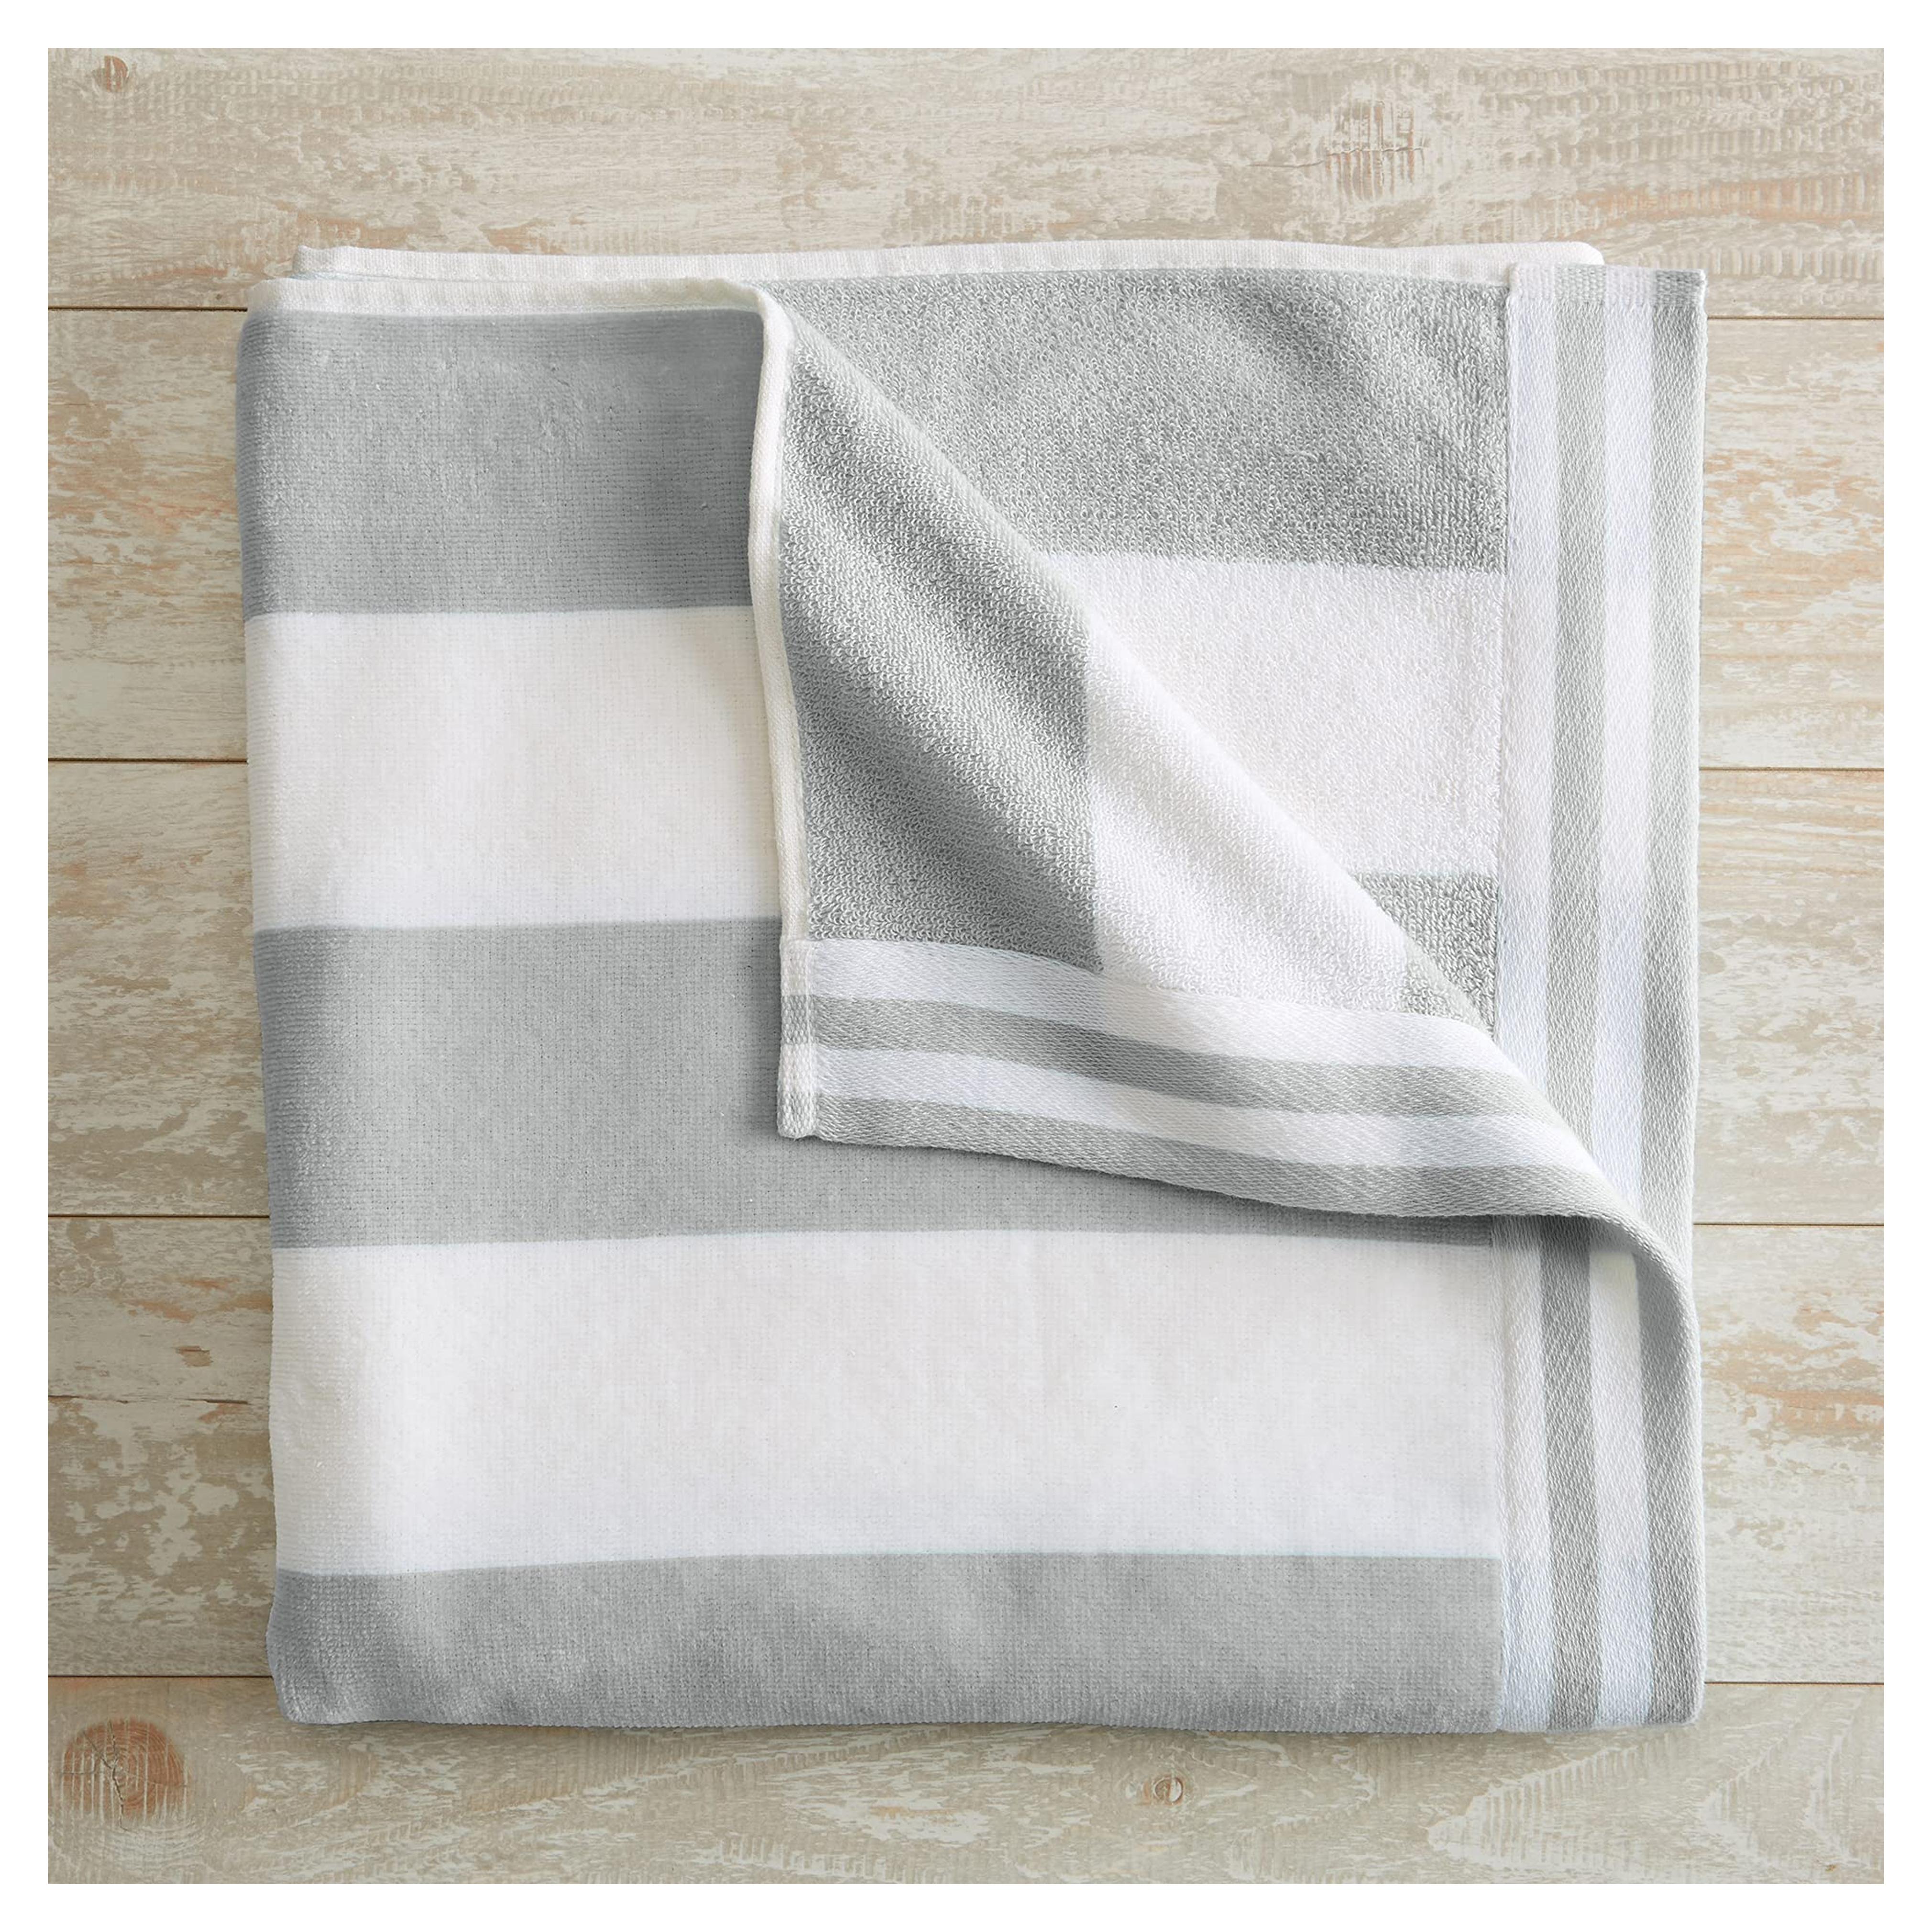 Oversized Beach Towel with 100% Cotton - XL Cabana Striped Beach Towels for Adults and Lightweight Pool Towels Oversized - Plush Extra Large Beach Towel and Quick Dry Beach Towel for Women and Men Single - 40" x 70" Pale Grey